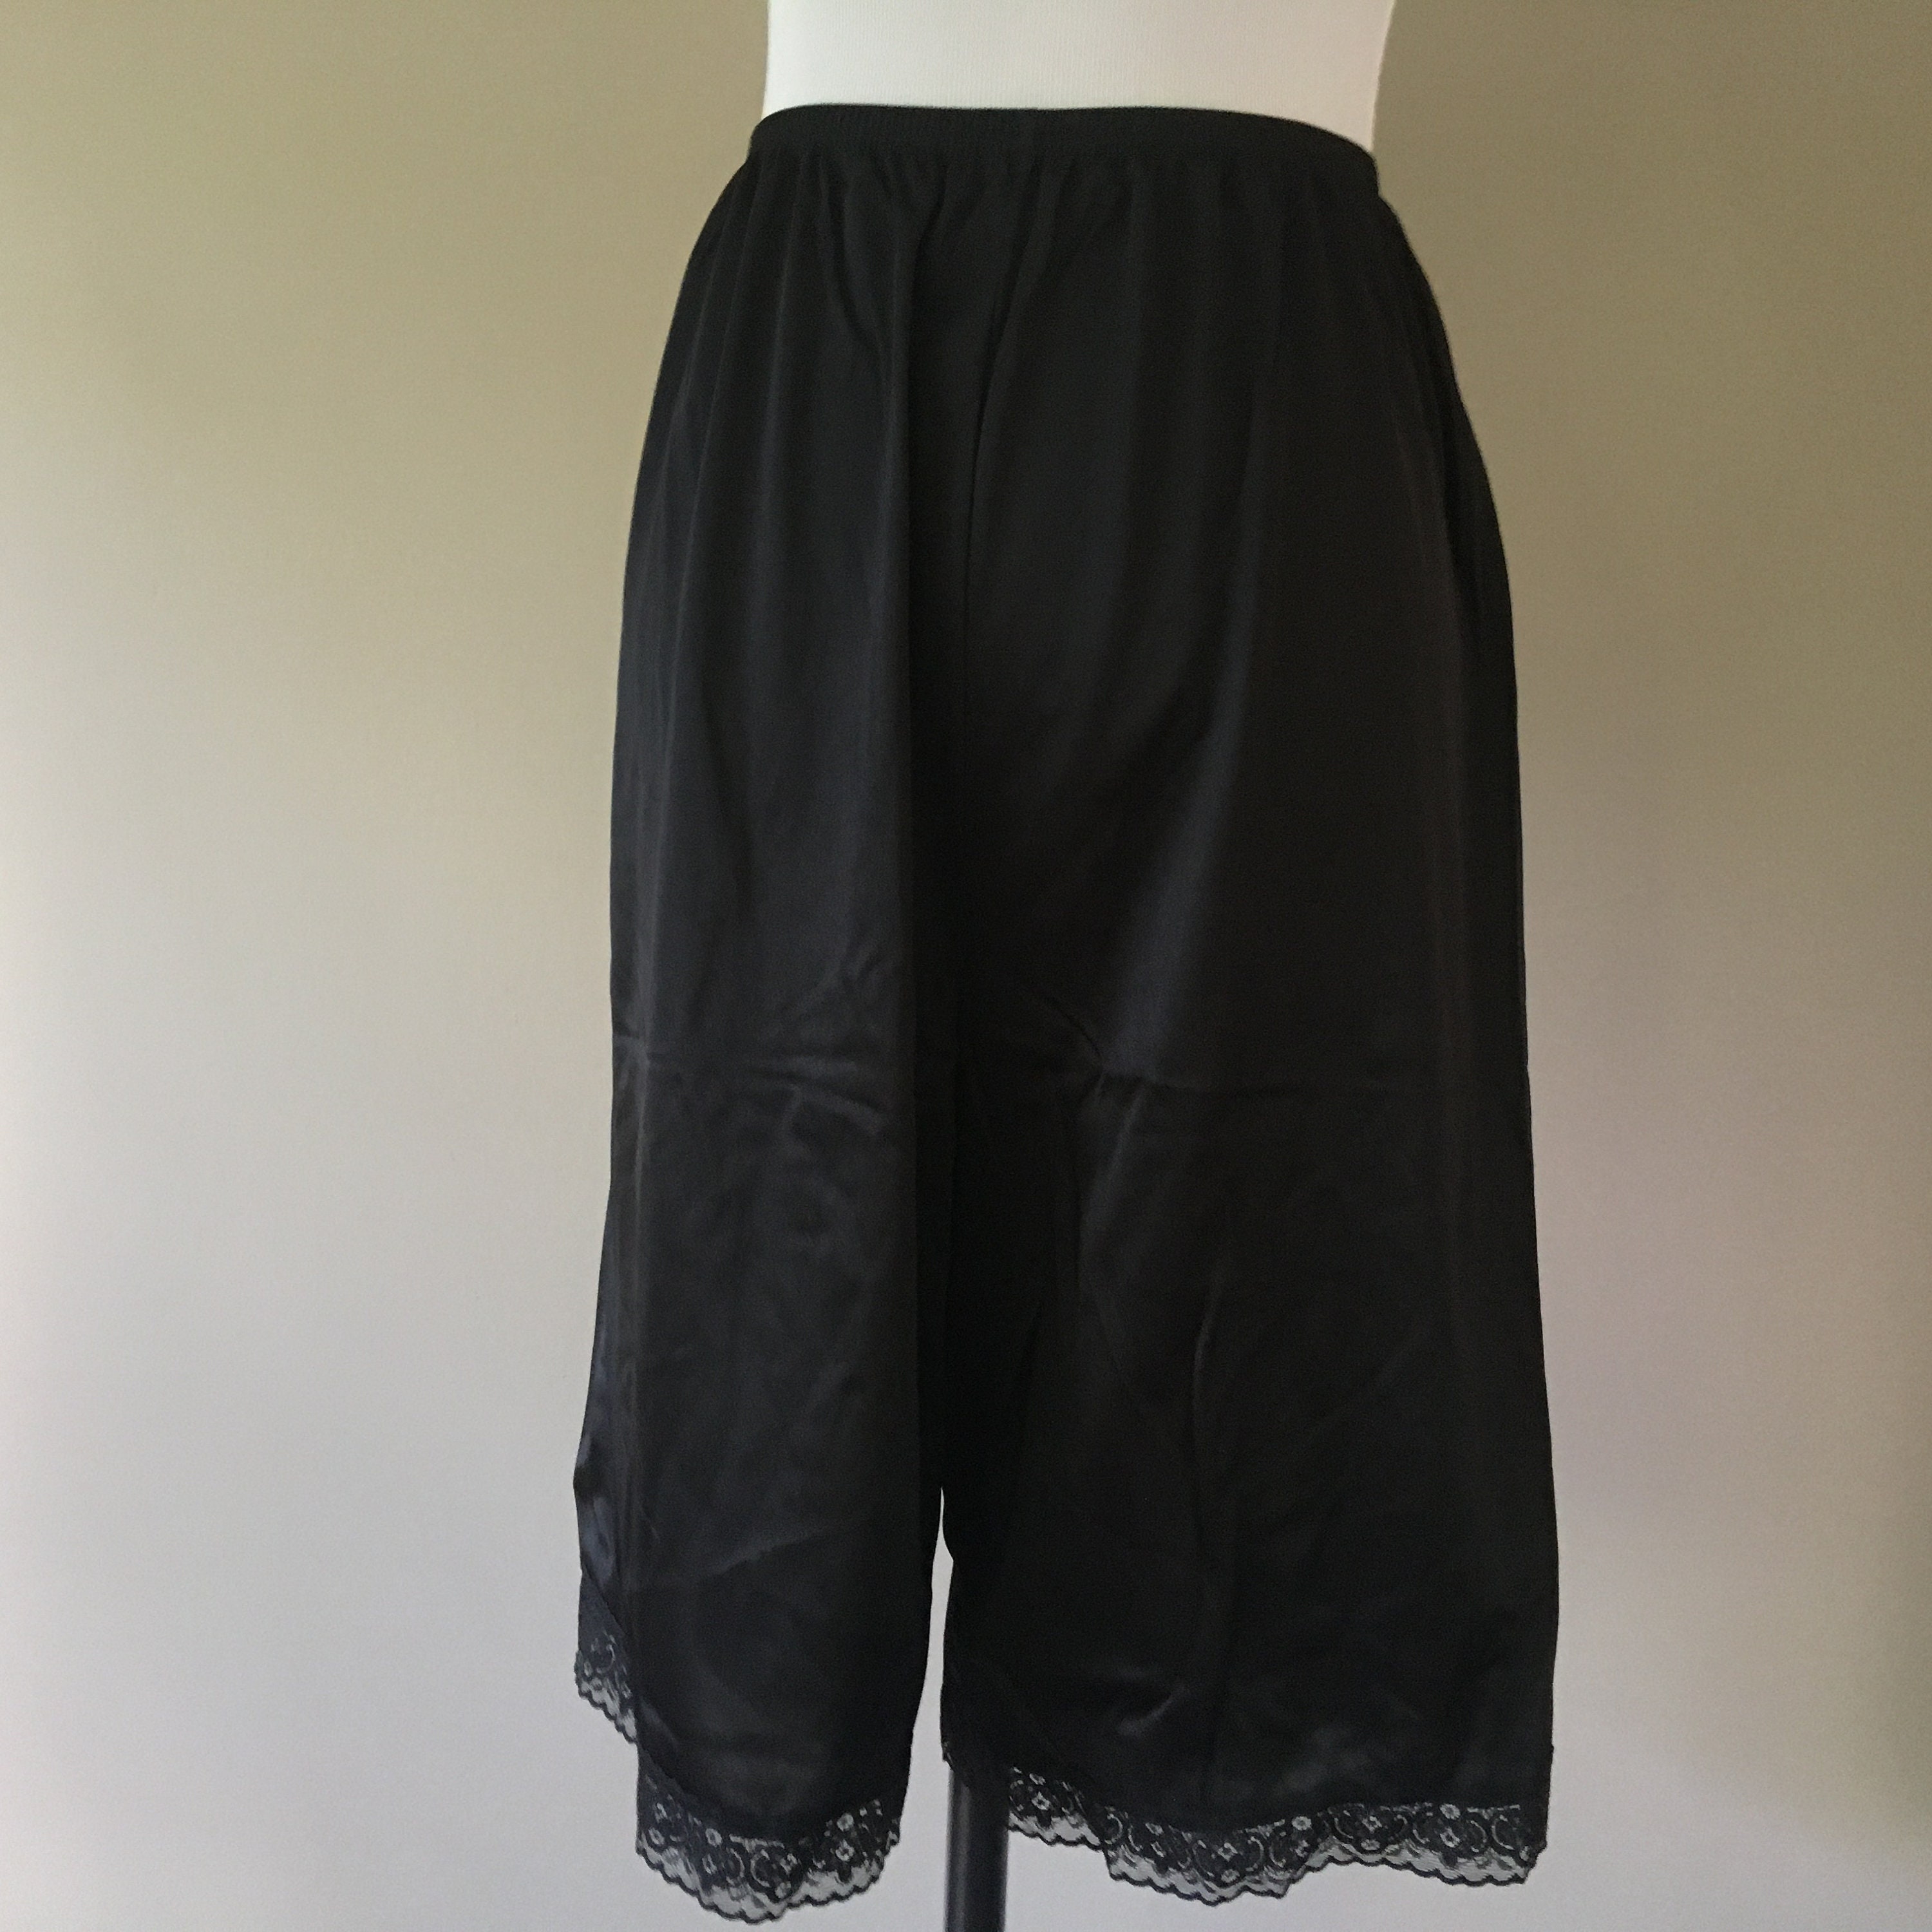 Pettipants Large Vanity Fair Black Nylon 24 Inches Long Metric 44 Made in  USA Large Bloomers Culottes Slip Pants Vintage Lingerie 